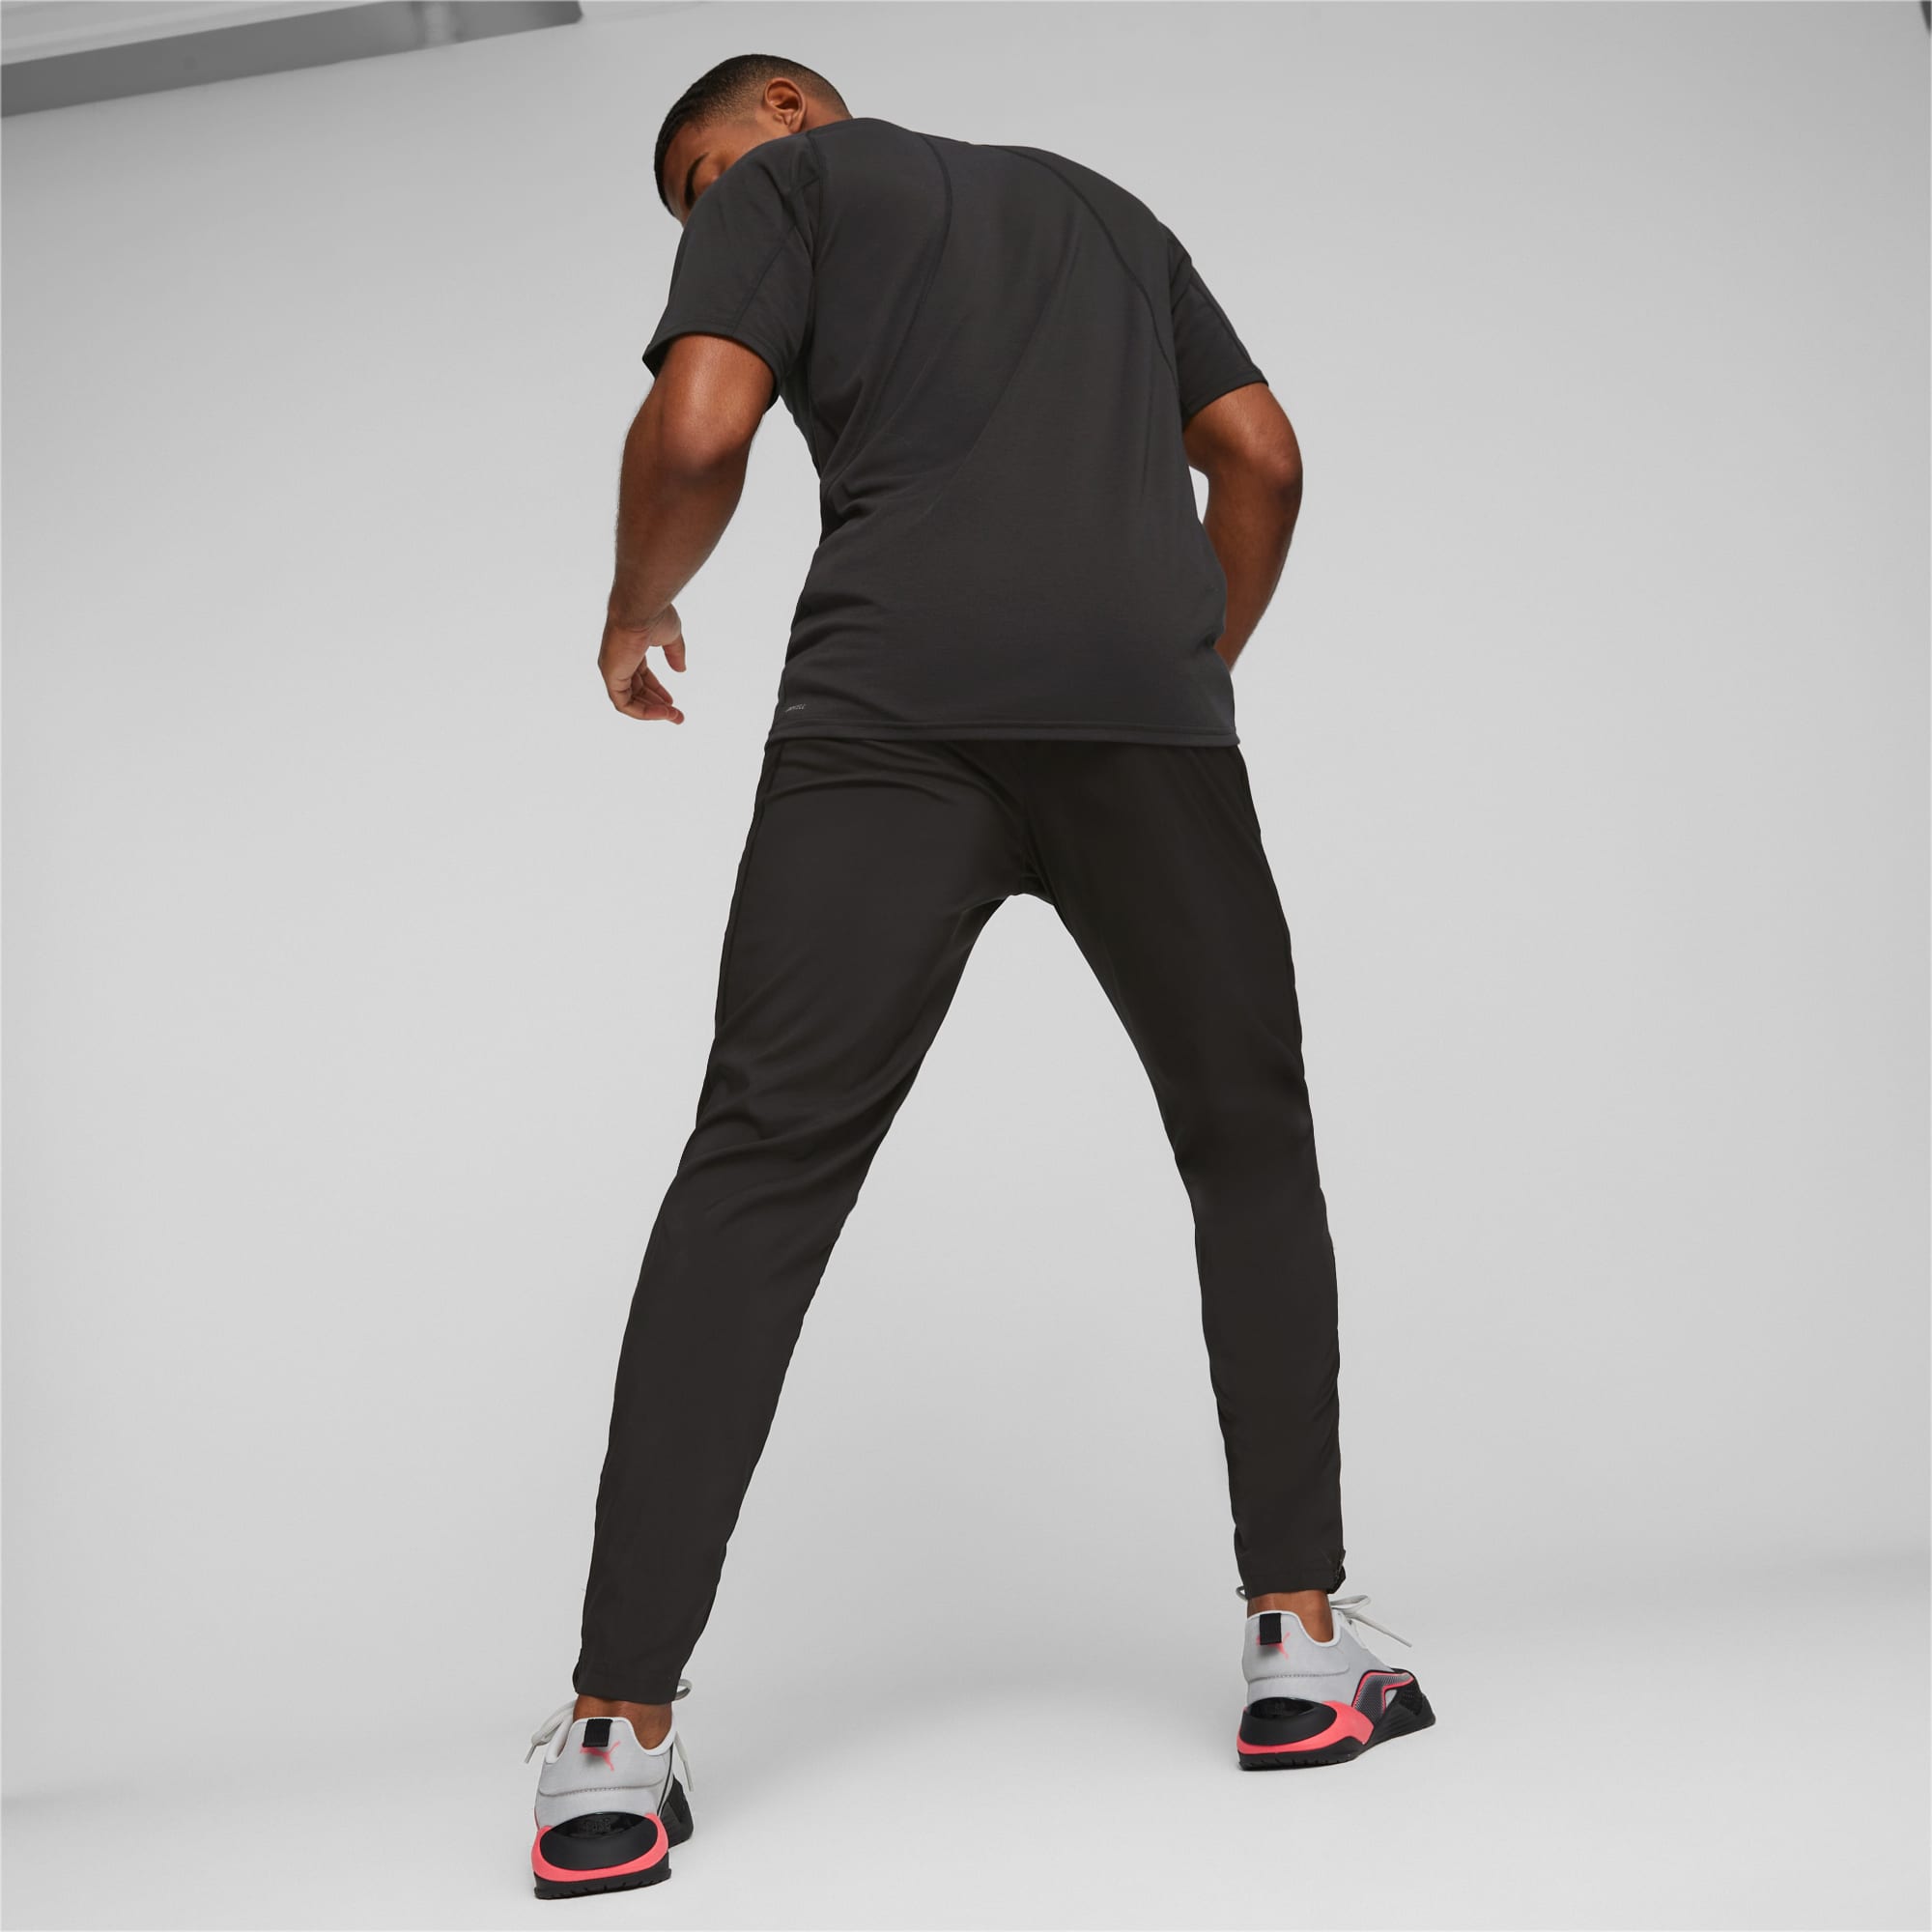 PUMA FIT Woven Tapered Men's Training Pants